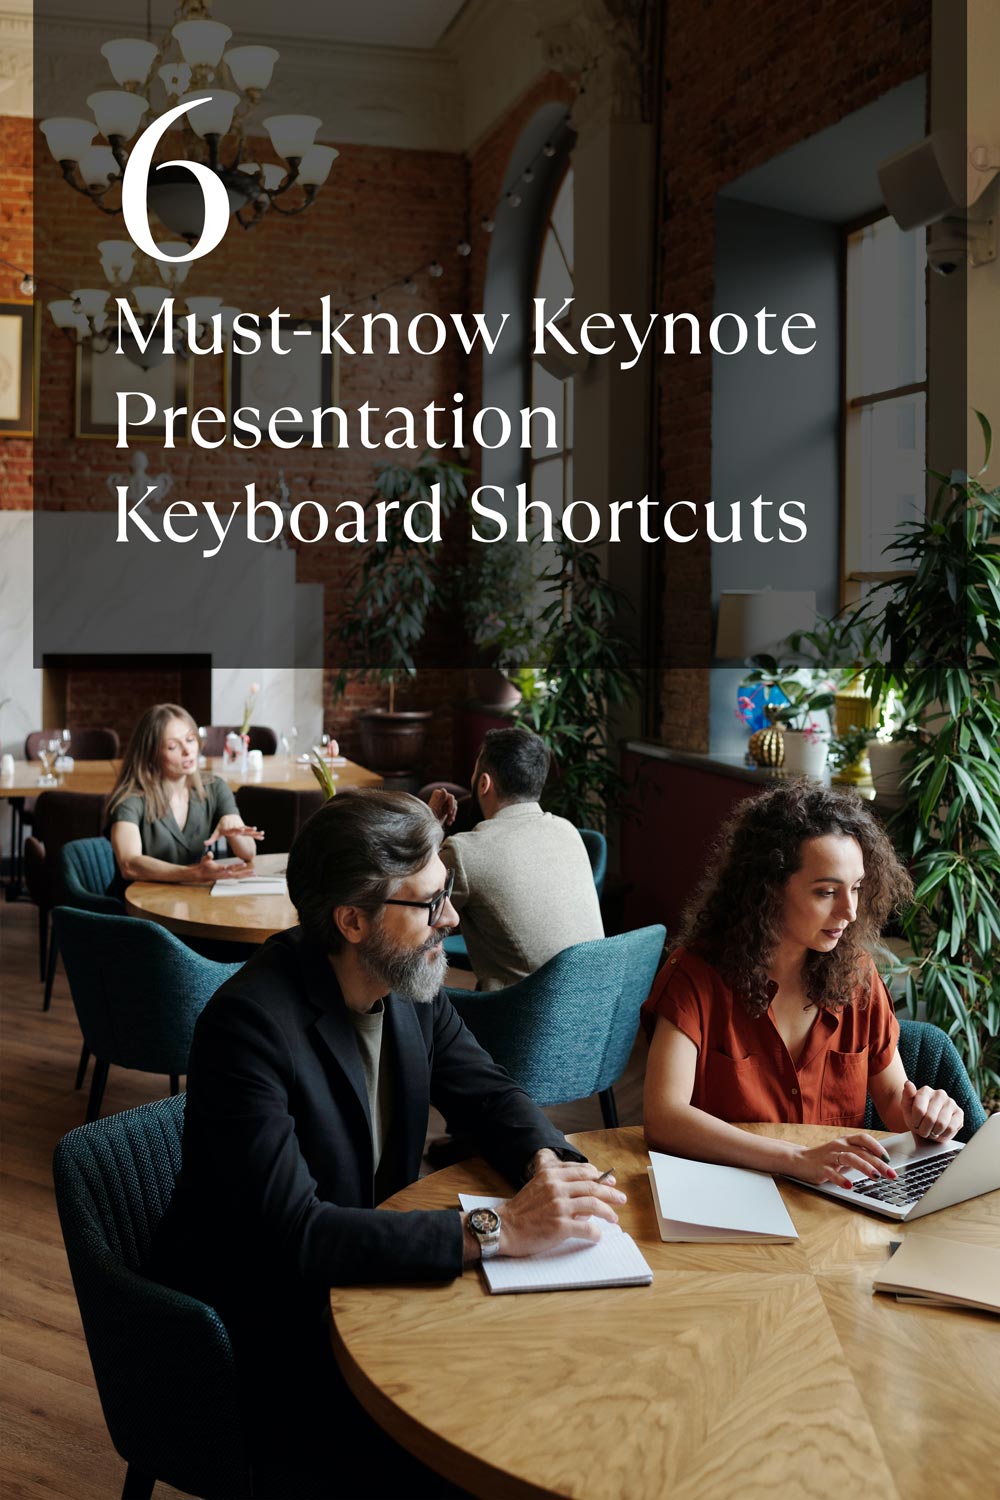 man and woman in a keynote presentation meeting in a cafe. With copy saying, 6 must-know keynote presentation keyboard shortcuts